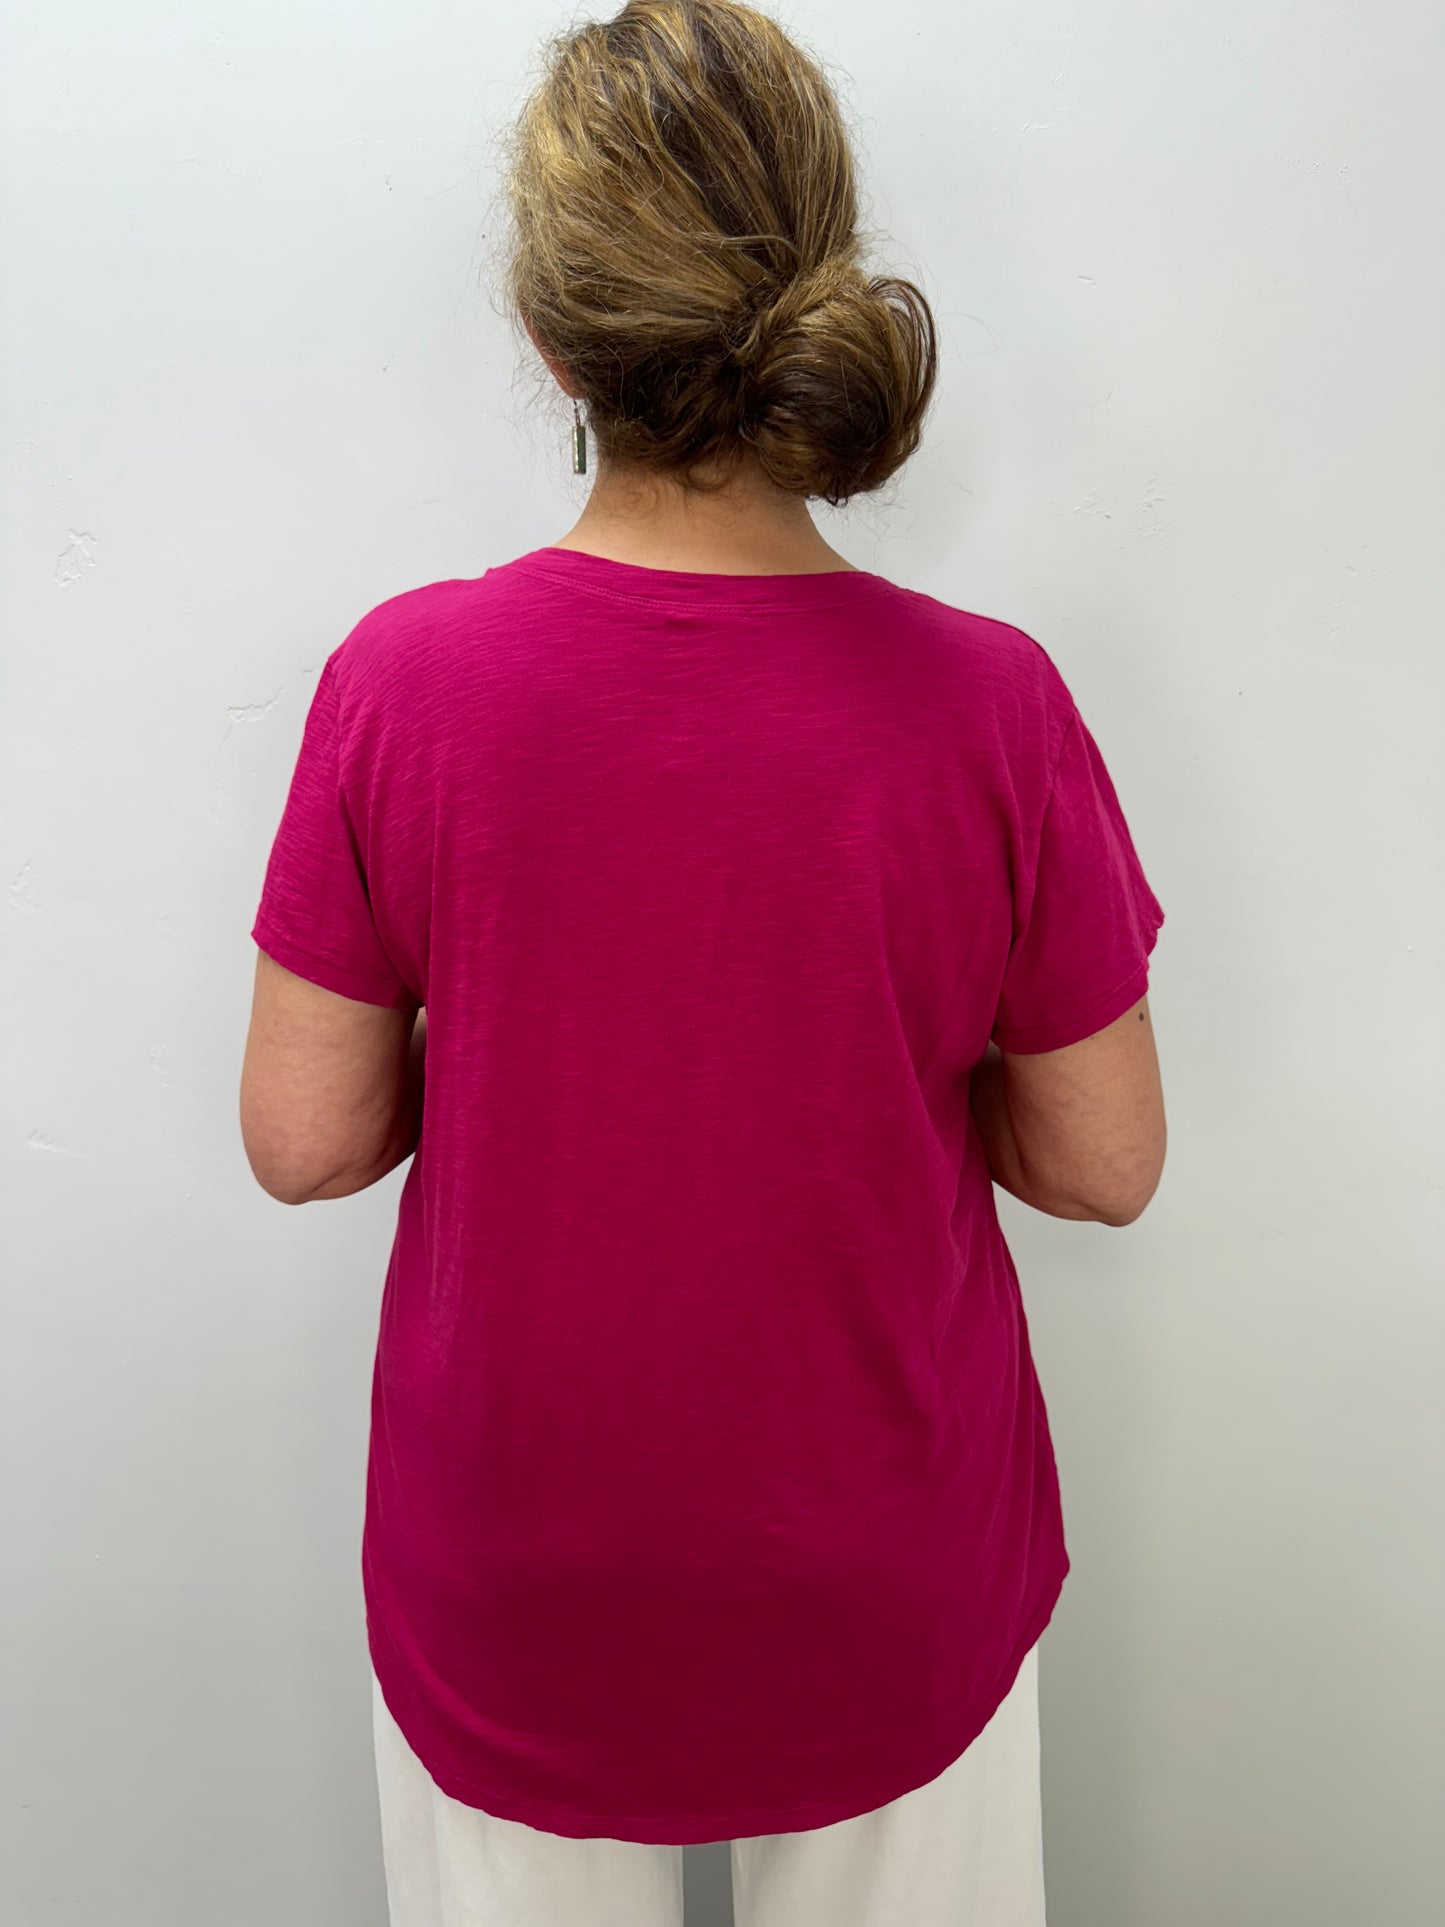 Cerise Pink Short Sleeve Top with Pocket